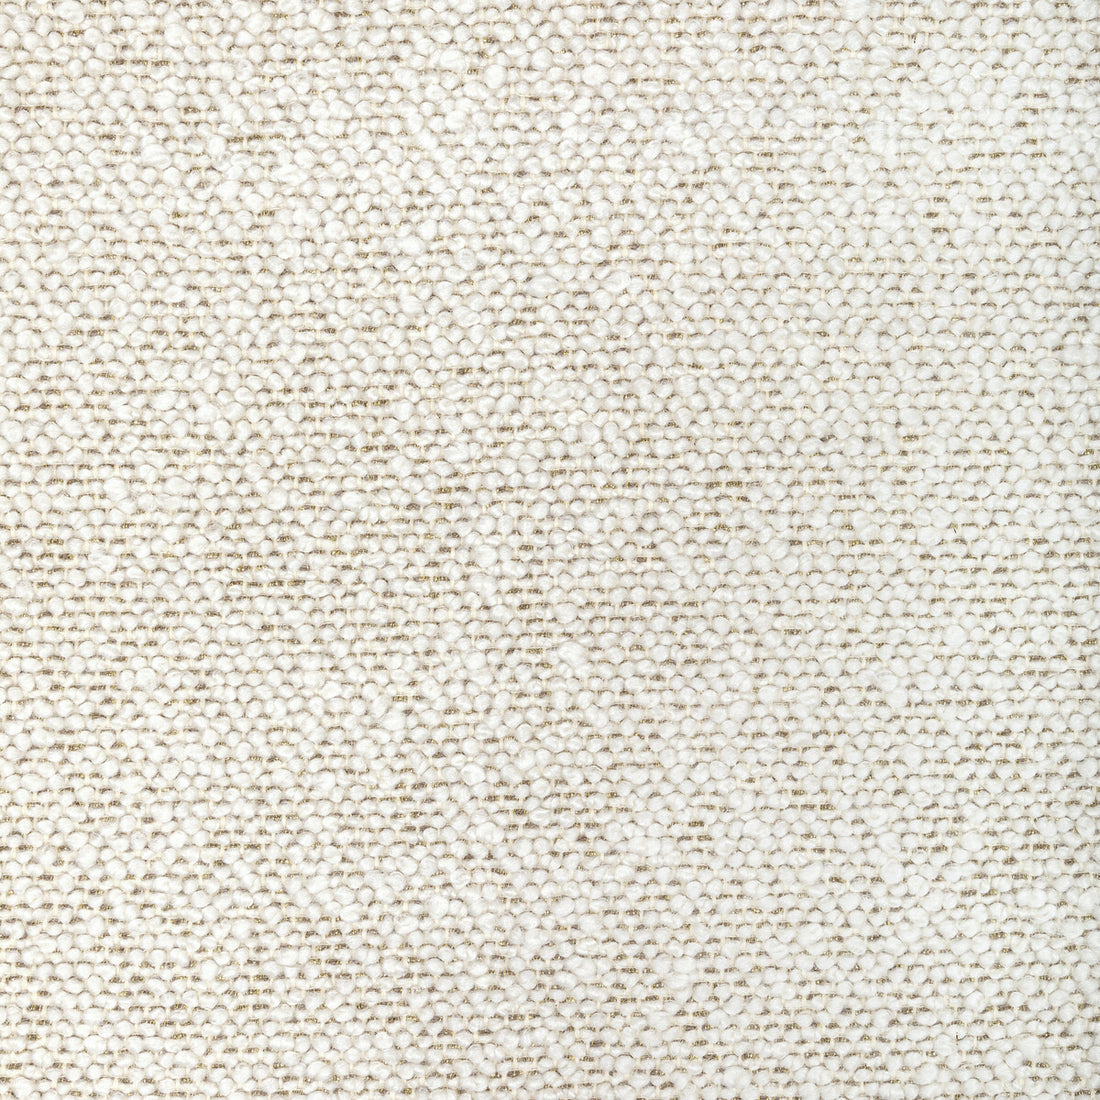 Cosmic Plush fabric in ivory gold color - pattern 36329.116.0 - by Kravet Couture in the Modern Luxe III collection